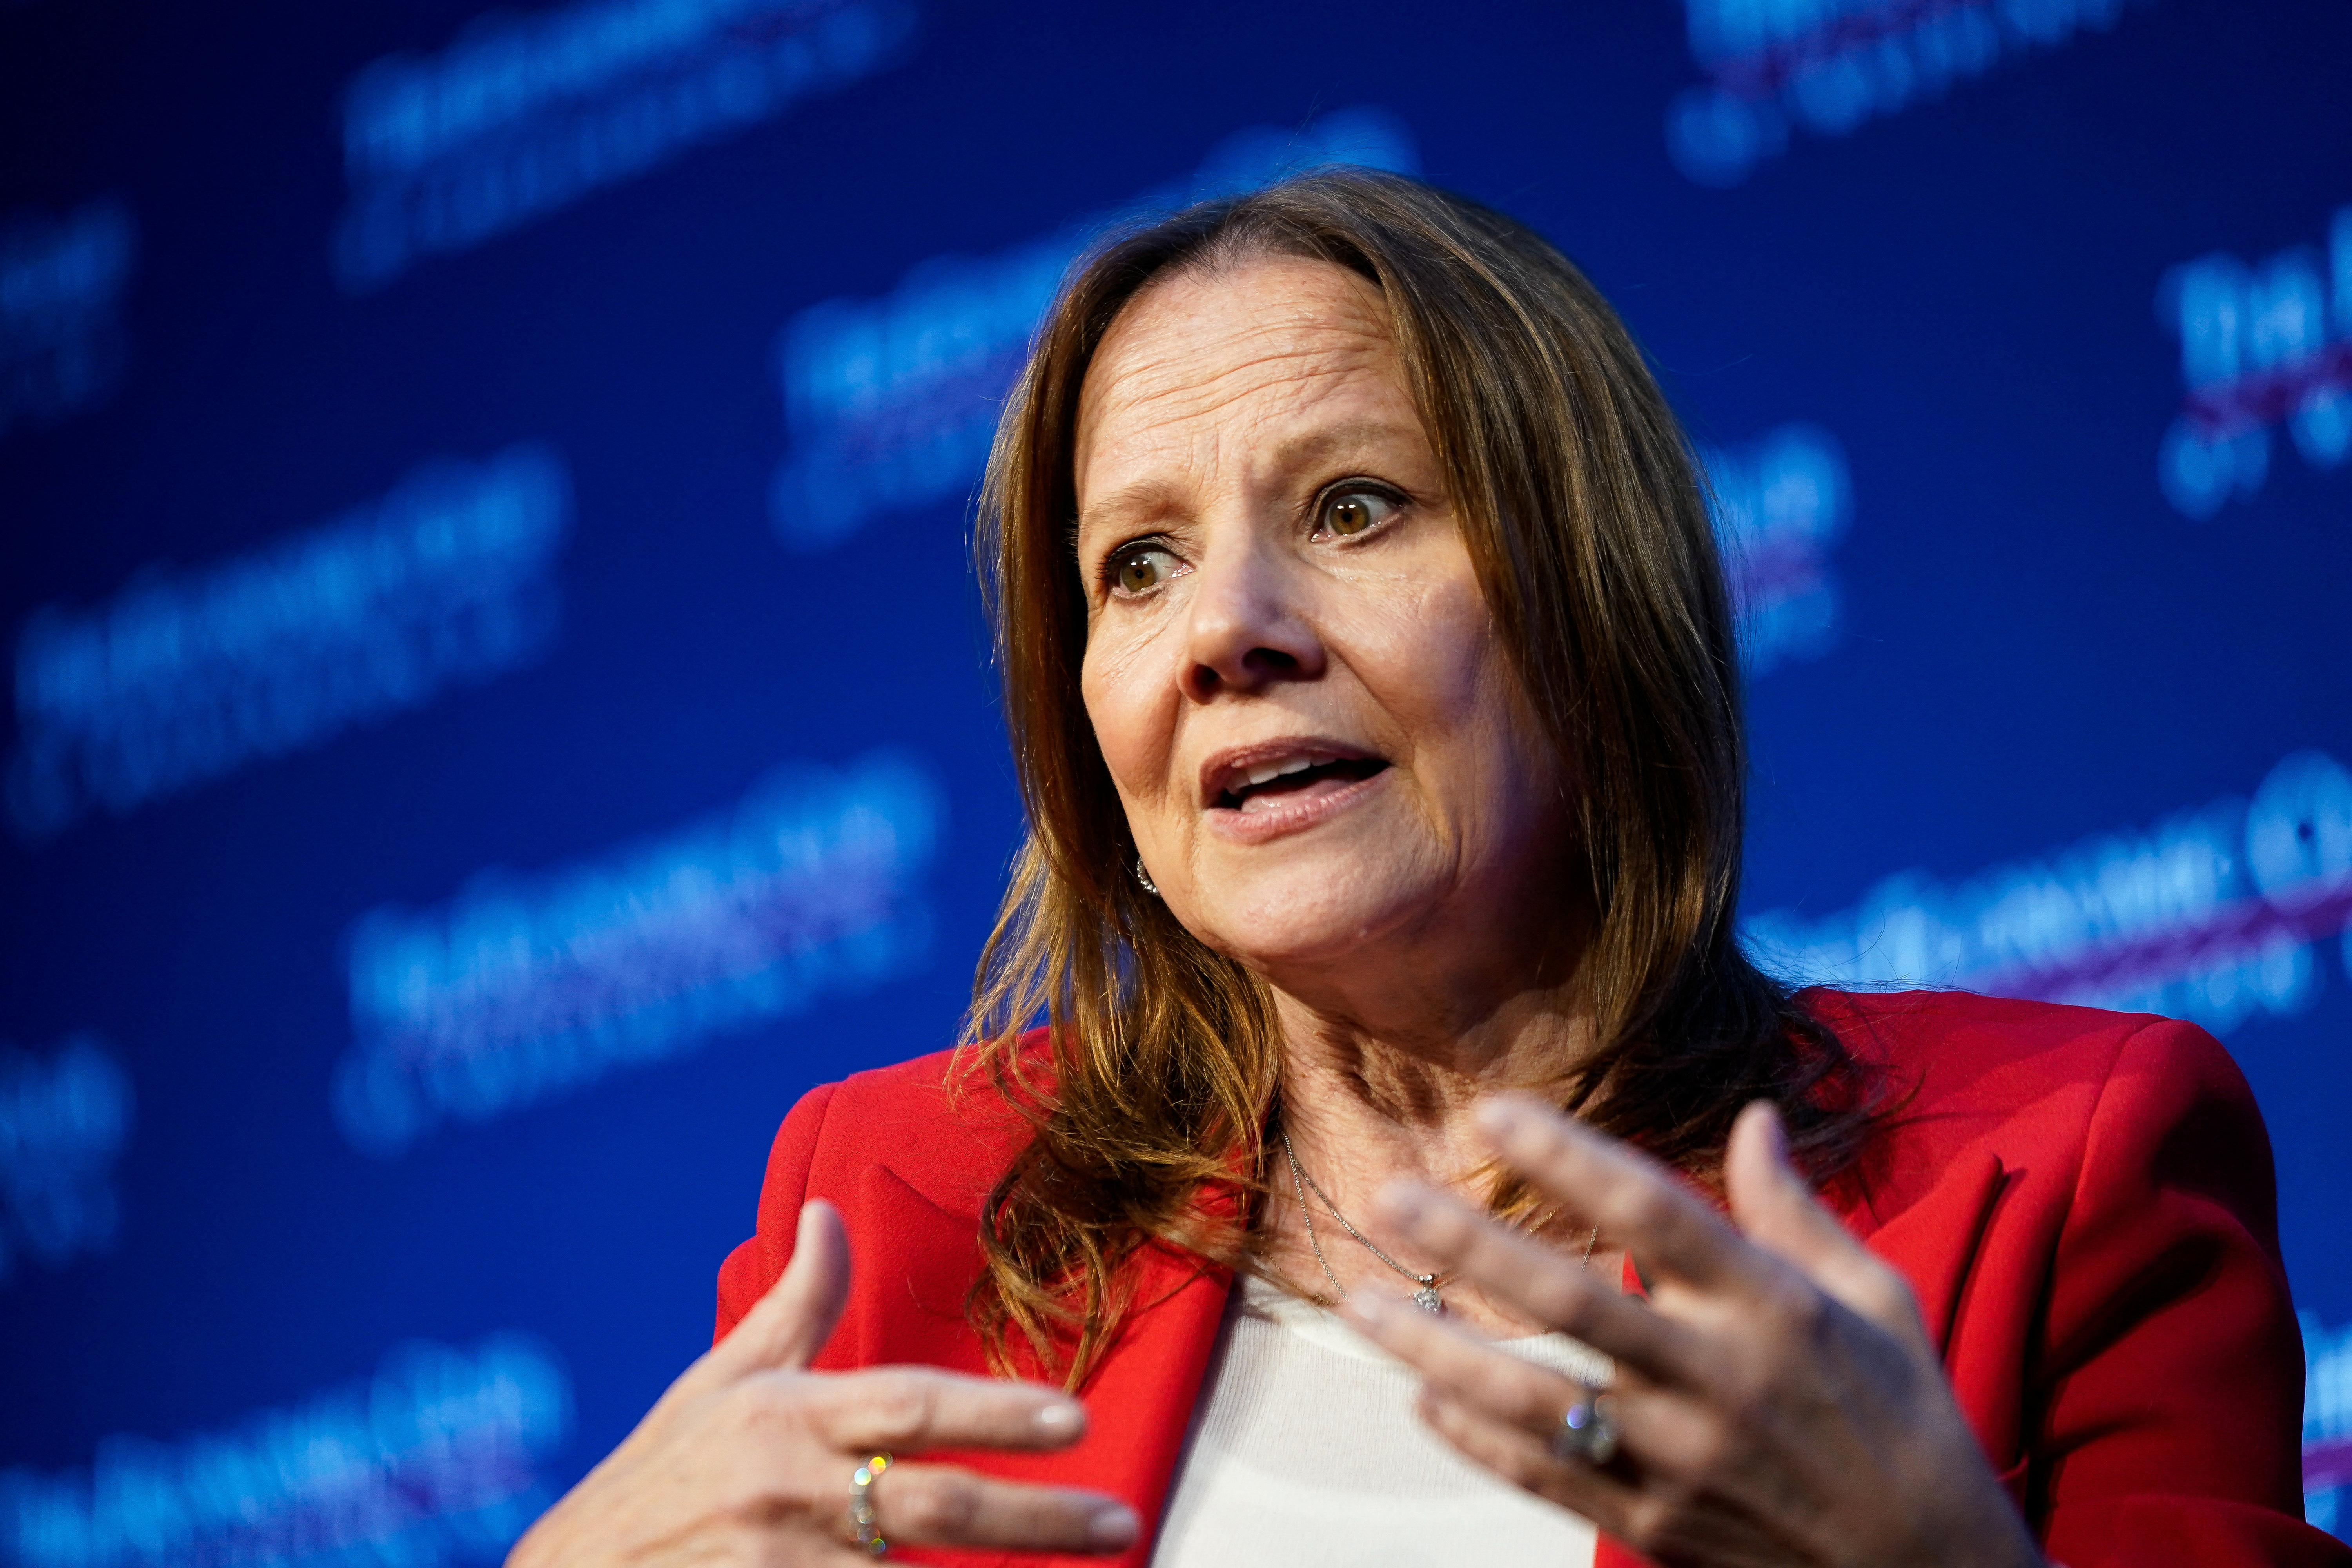 General Motors chair and CEO Mary Barra participates in an Economic Club of Washington discussion in Washington